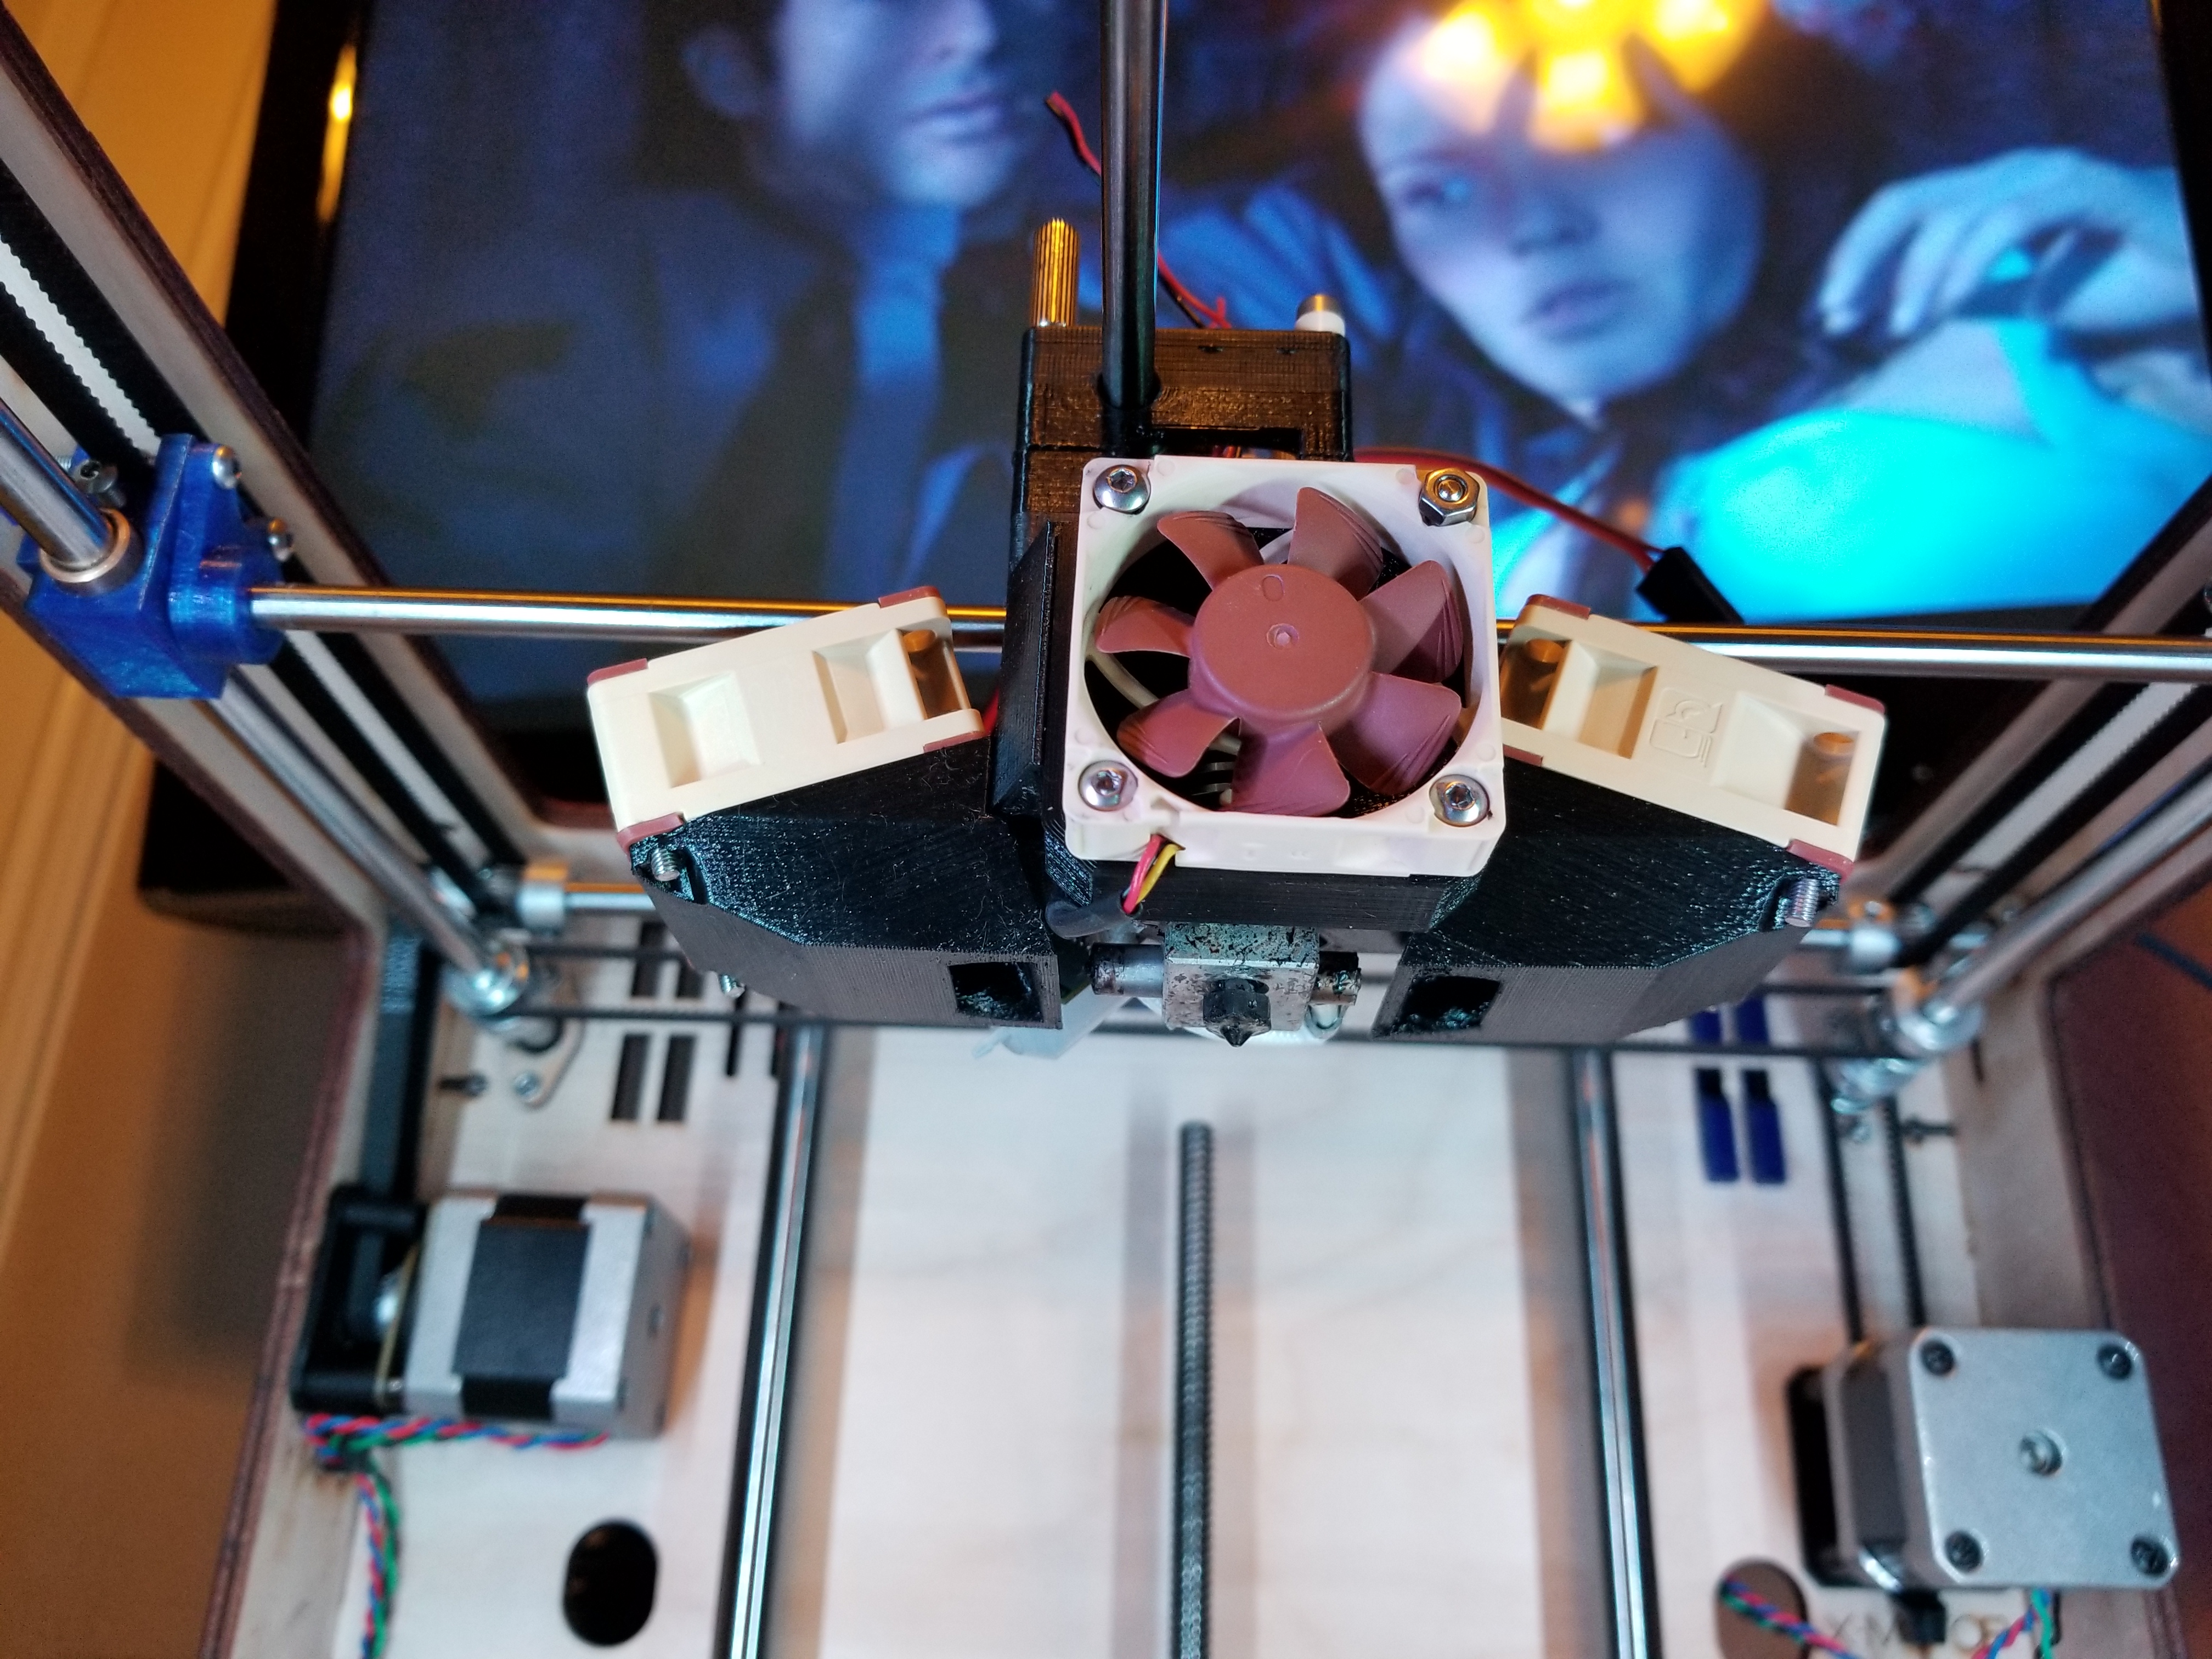 Ultimaker Original Plus with E3D v6, dual fan, and BLTouch mount